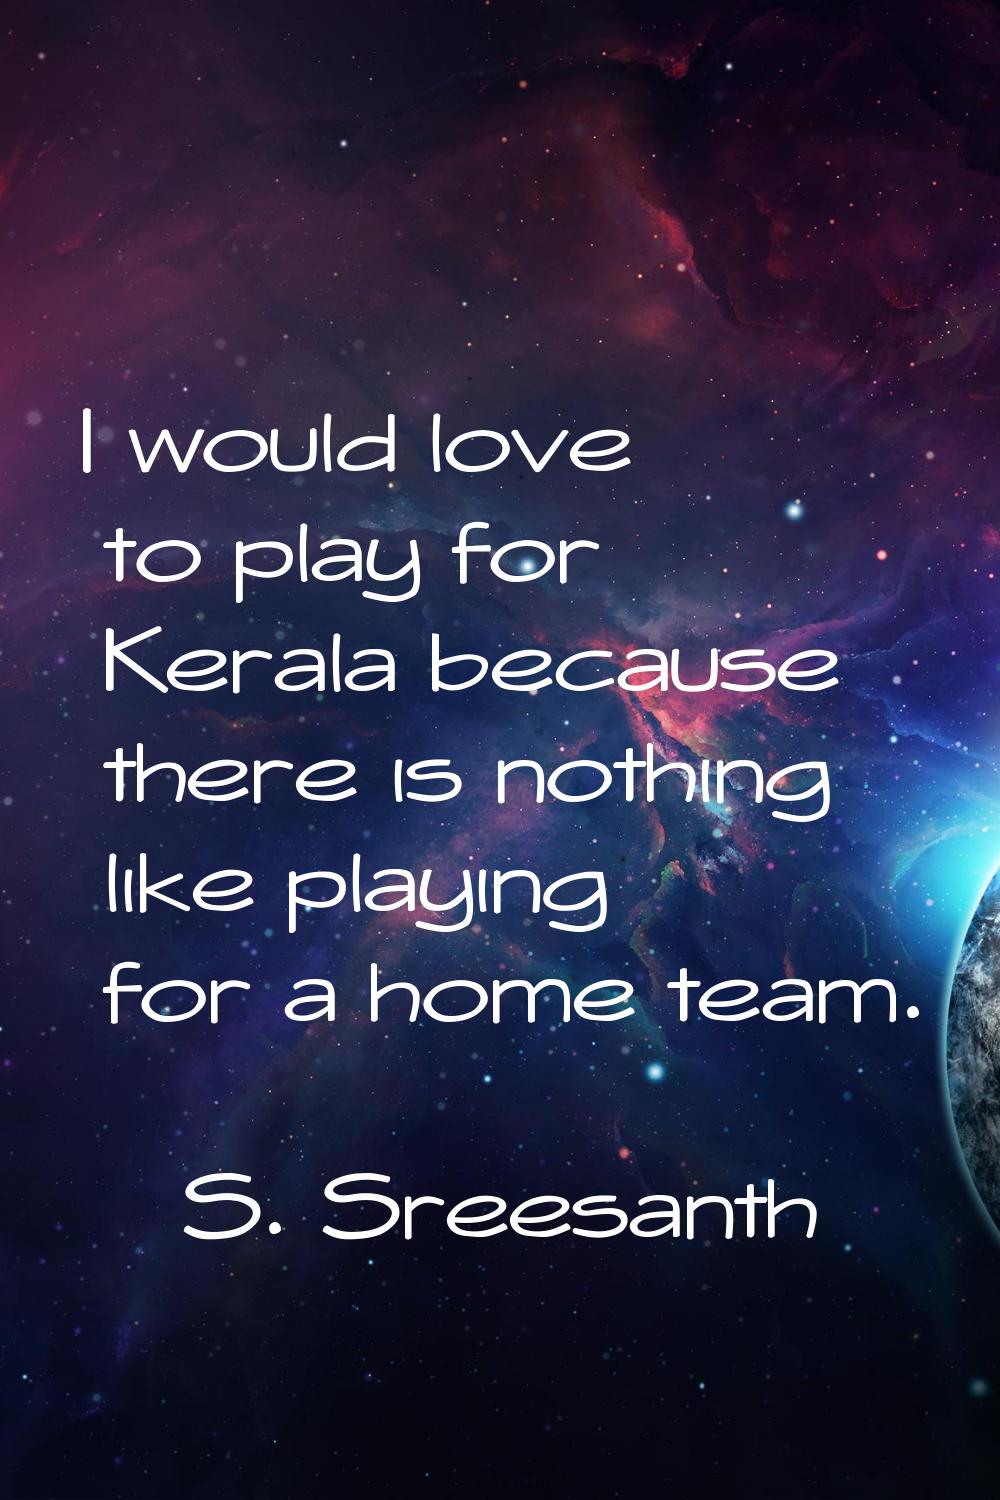 I would love to play for Kerala because there is nothing like playing for a home team.